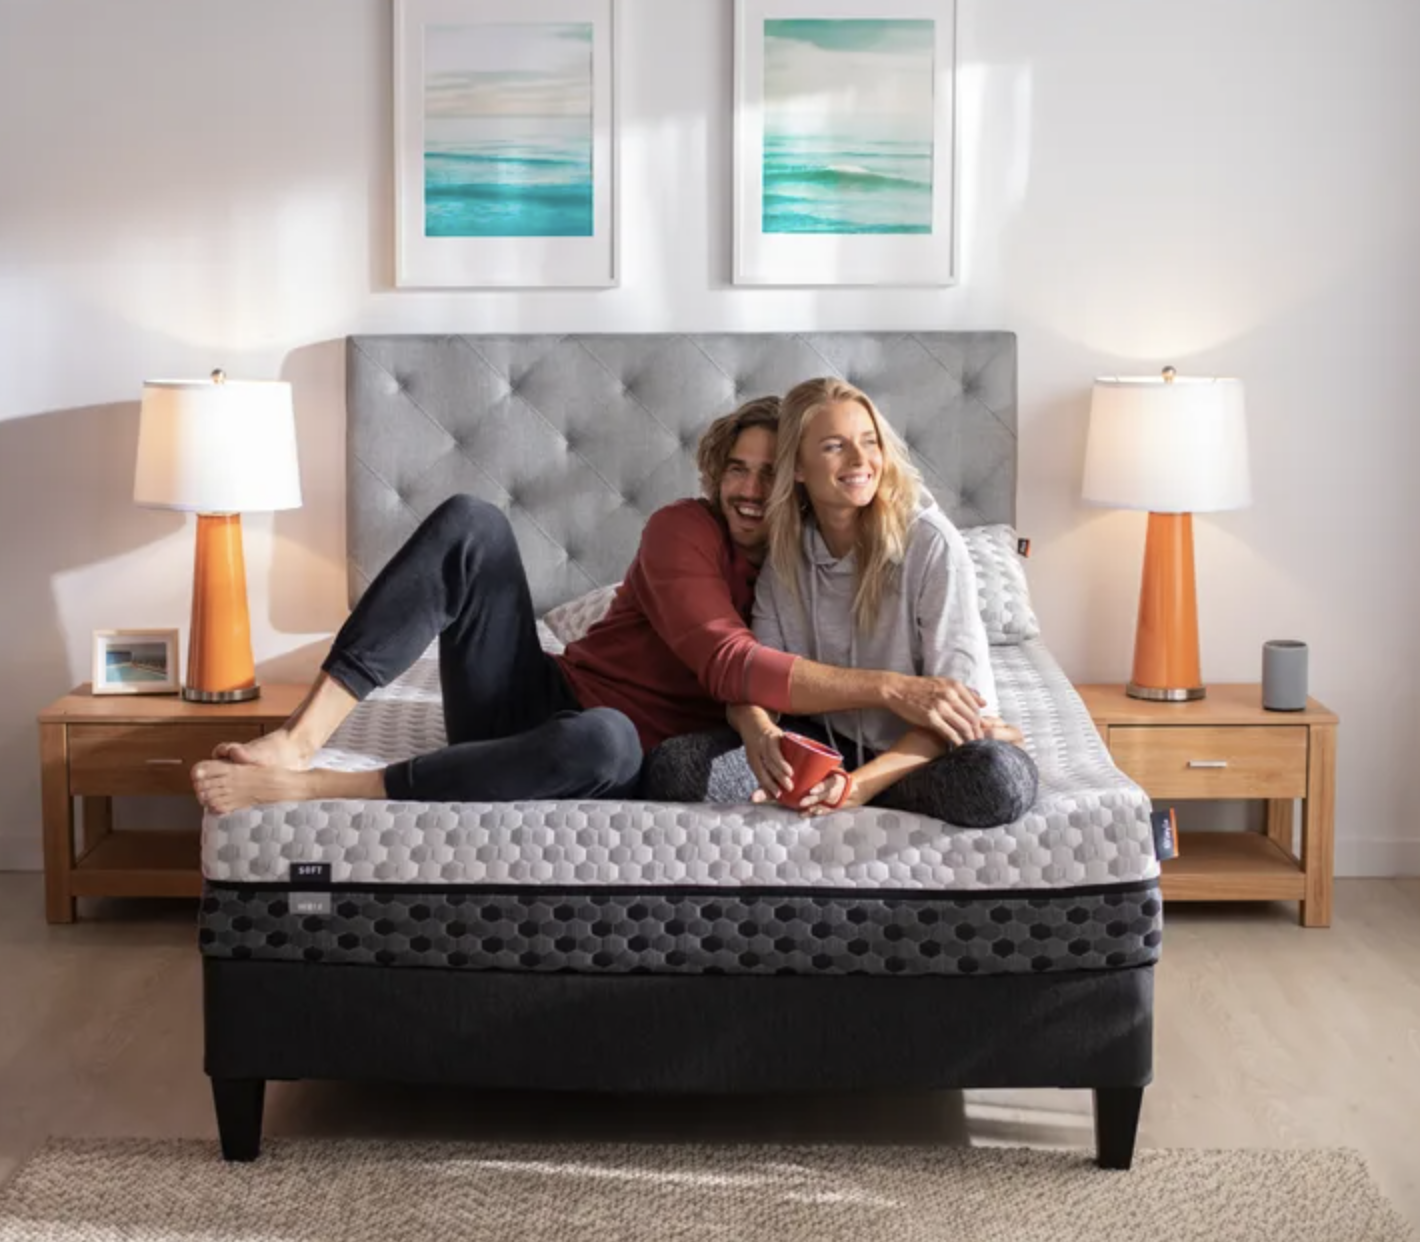 Two models are sitting on the mattress on top of a bed frame